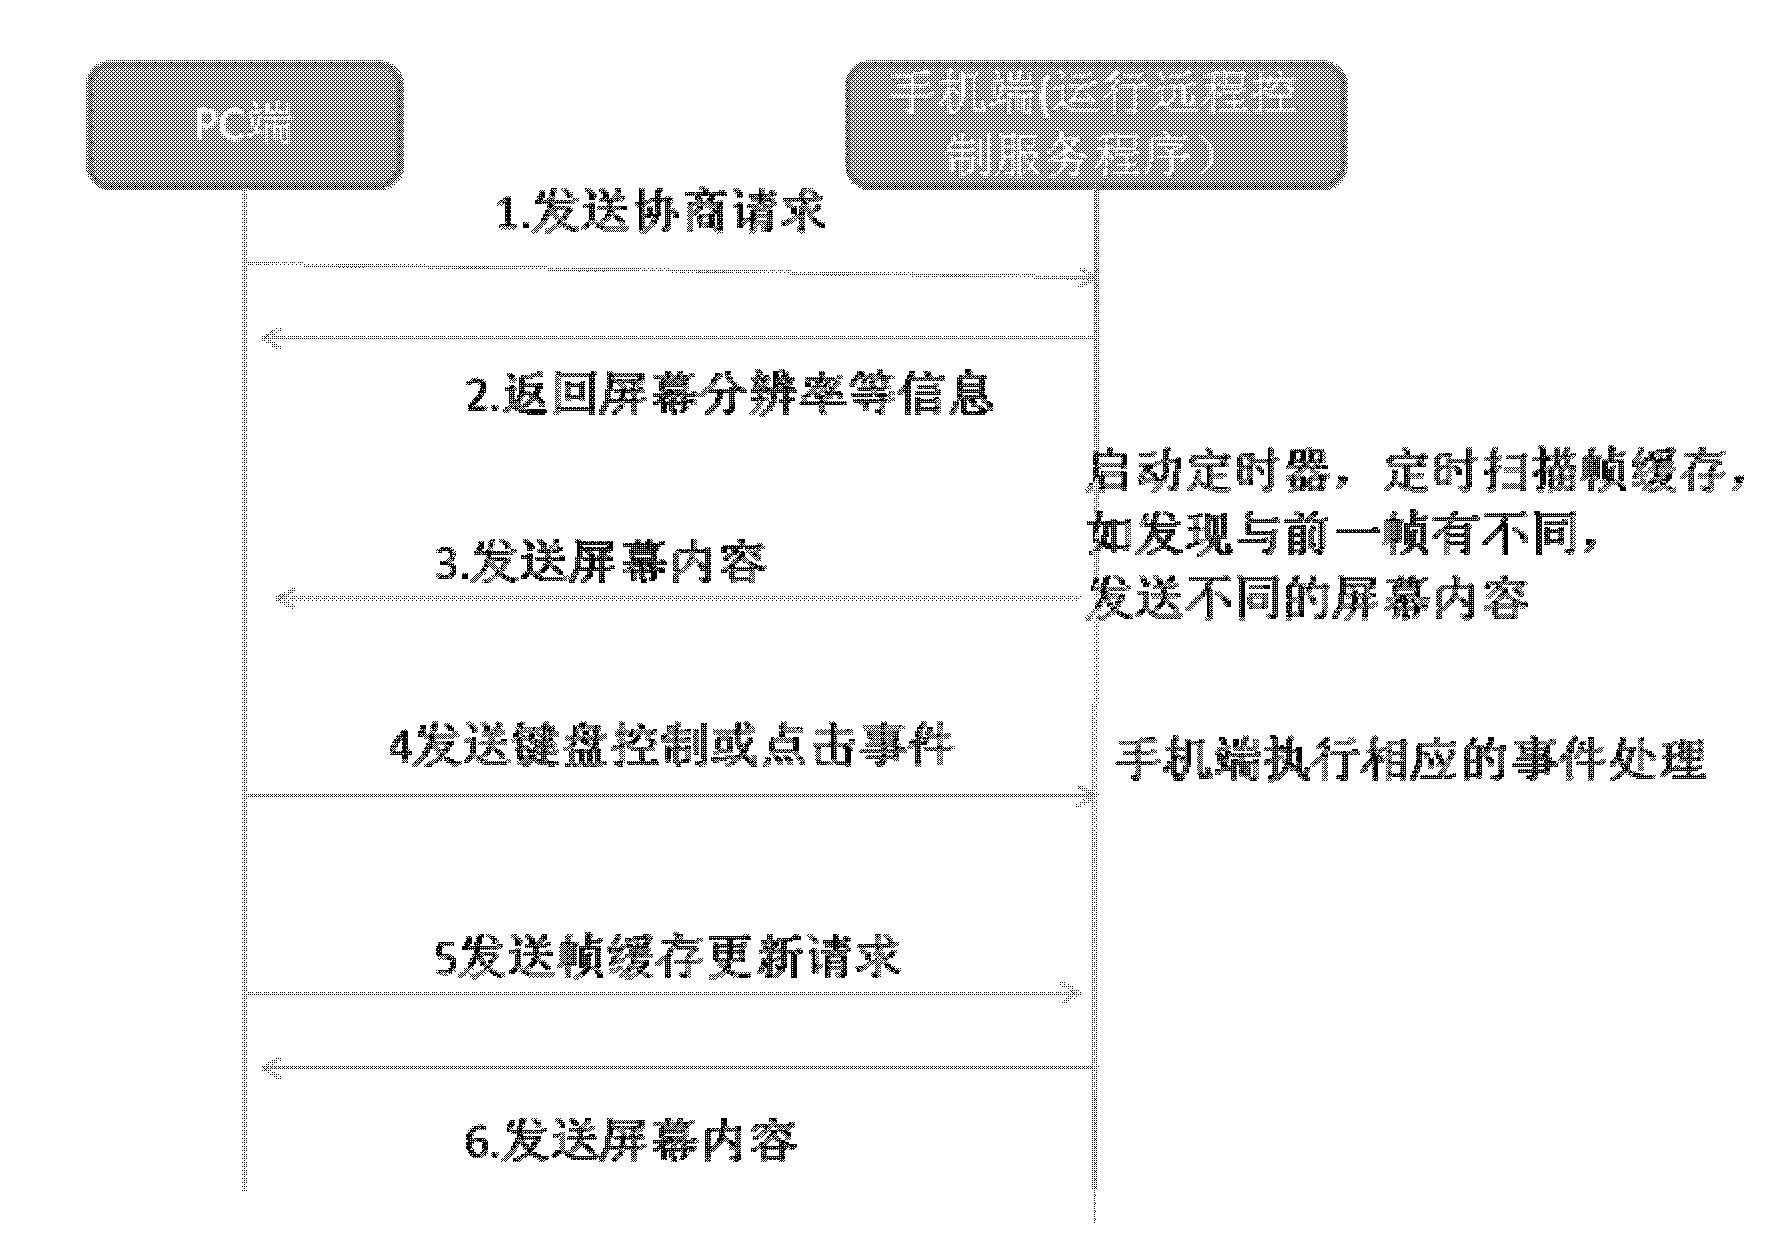 Teleconference communication method and system based on mobile phones